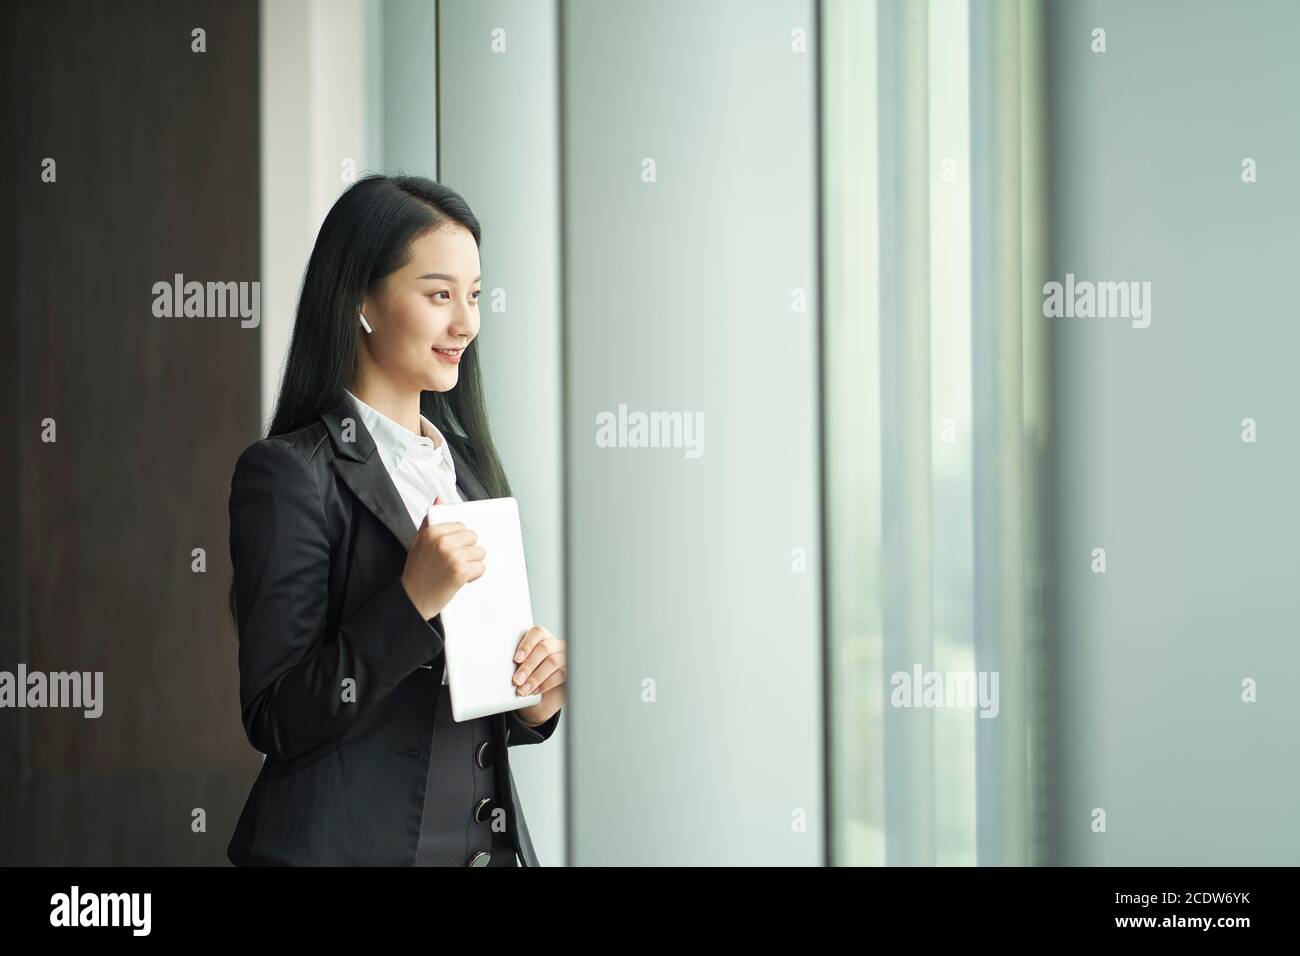 young asian businesswoman standing by window with digital tablet in hand looking out Stock Photo